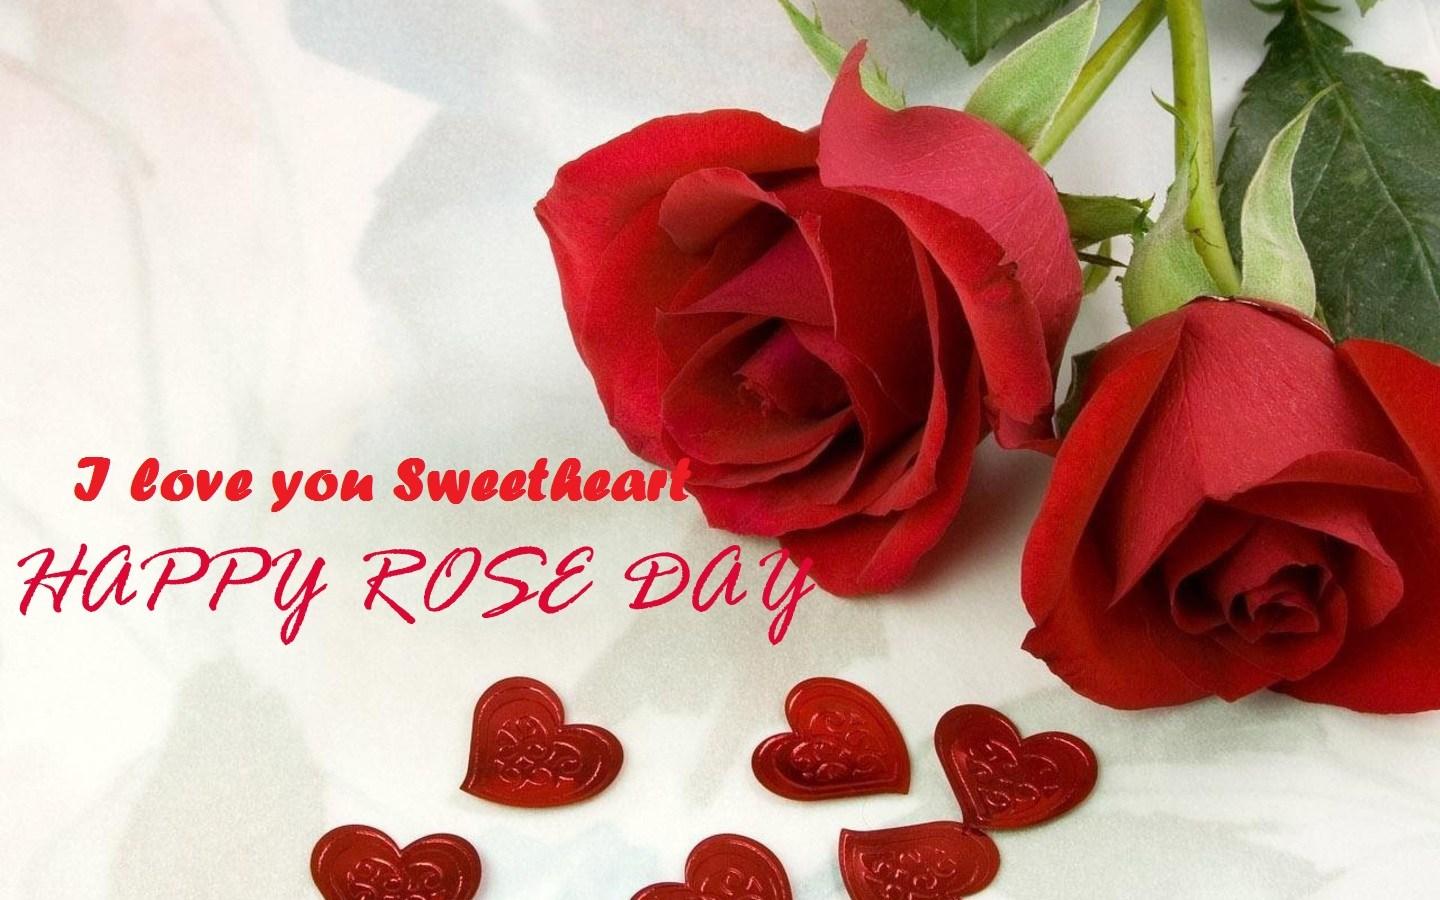 HD Wallpaper of Rose Day 2017 Latest Image of Rose for Gf lovers